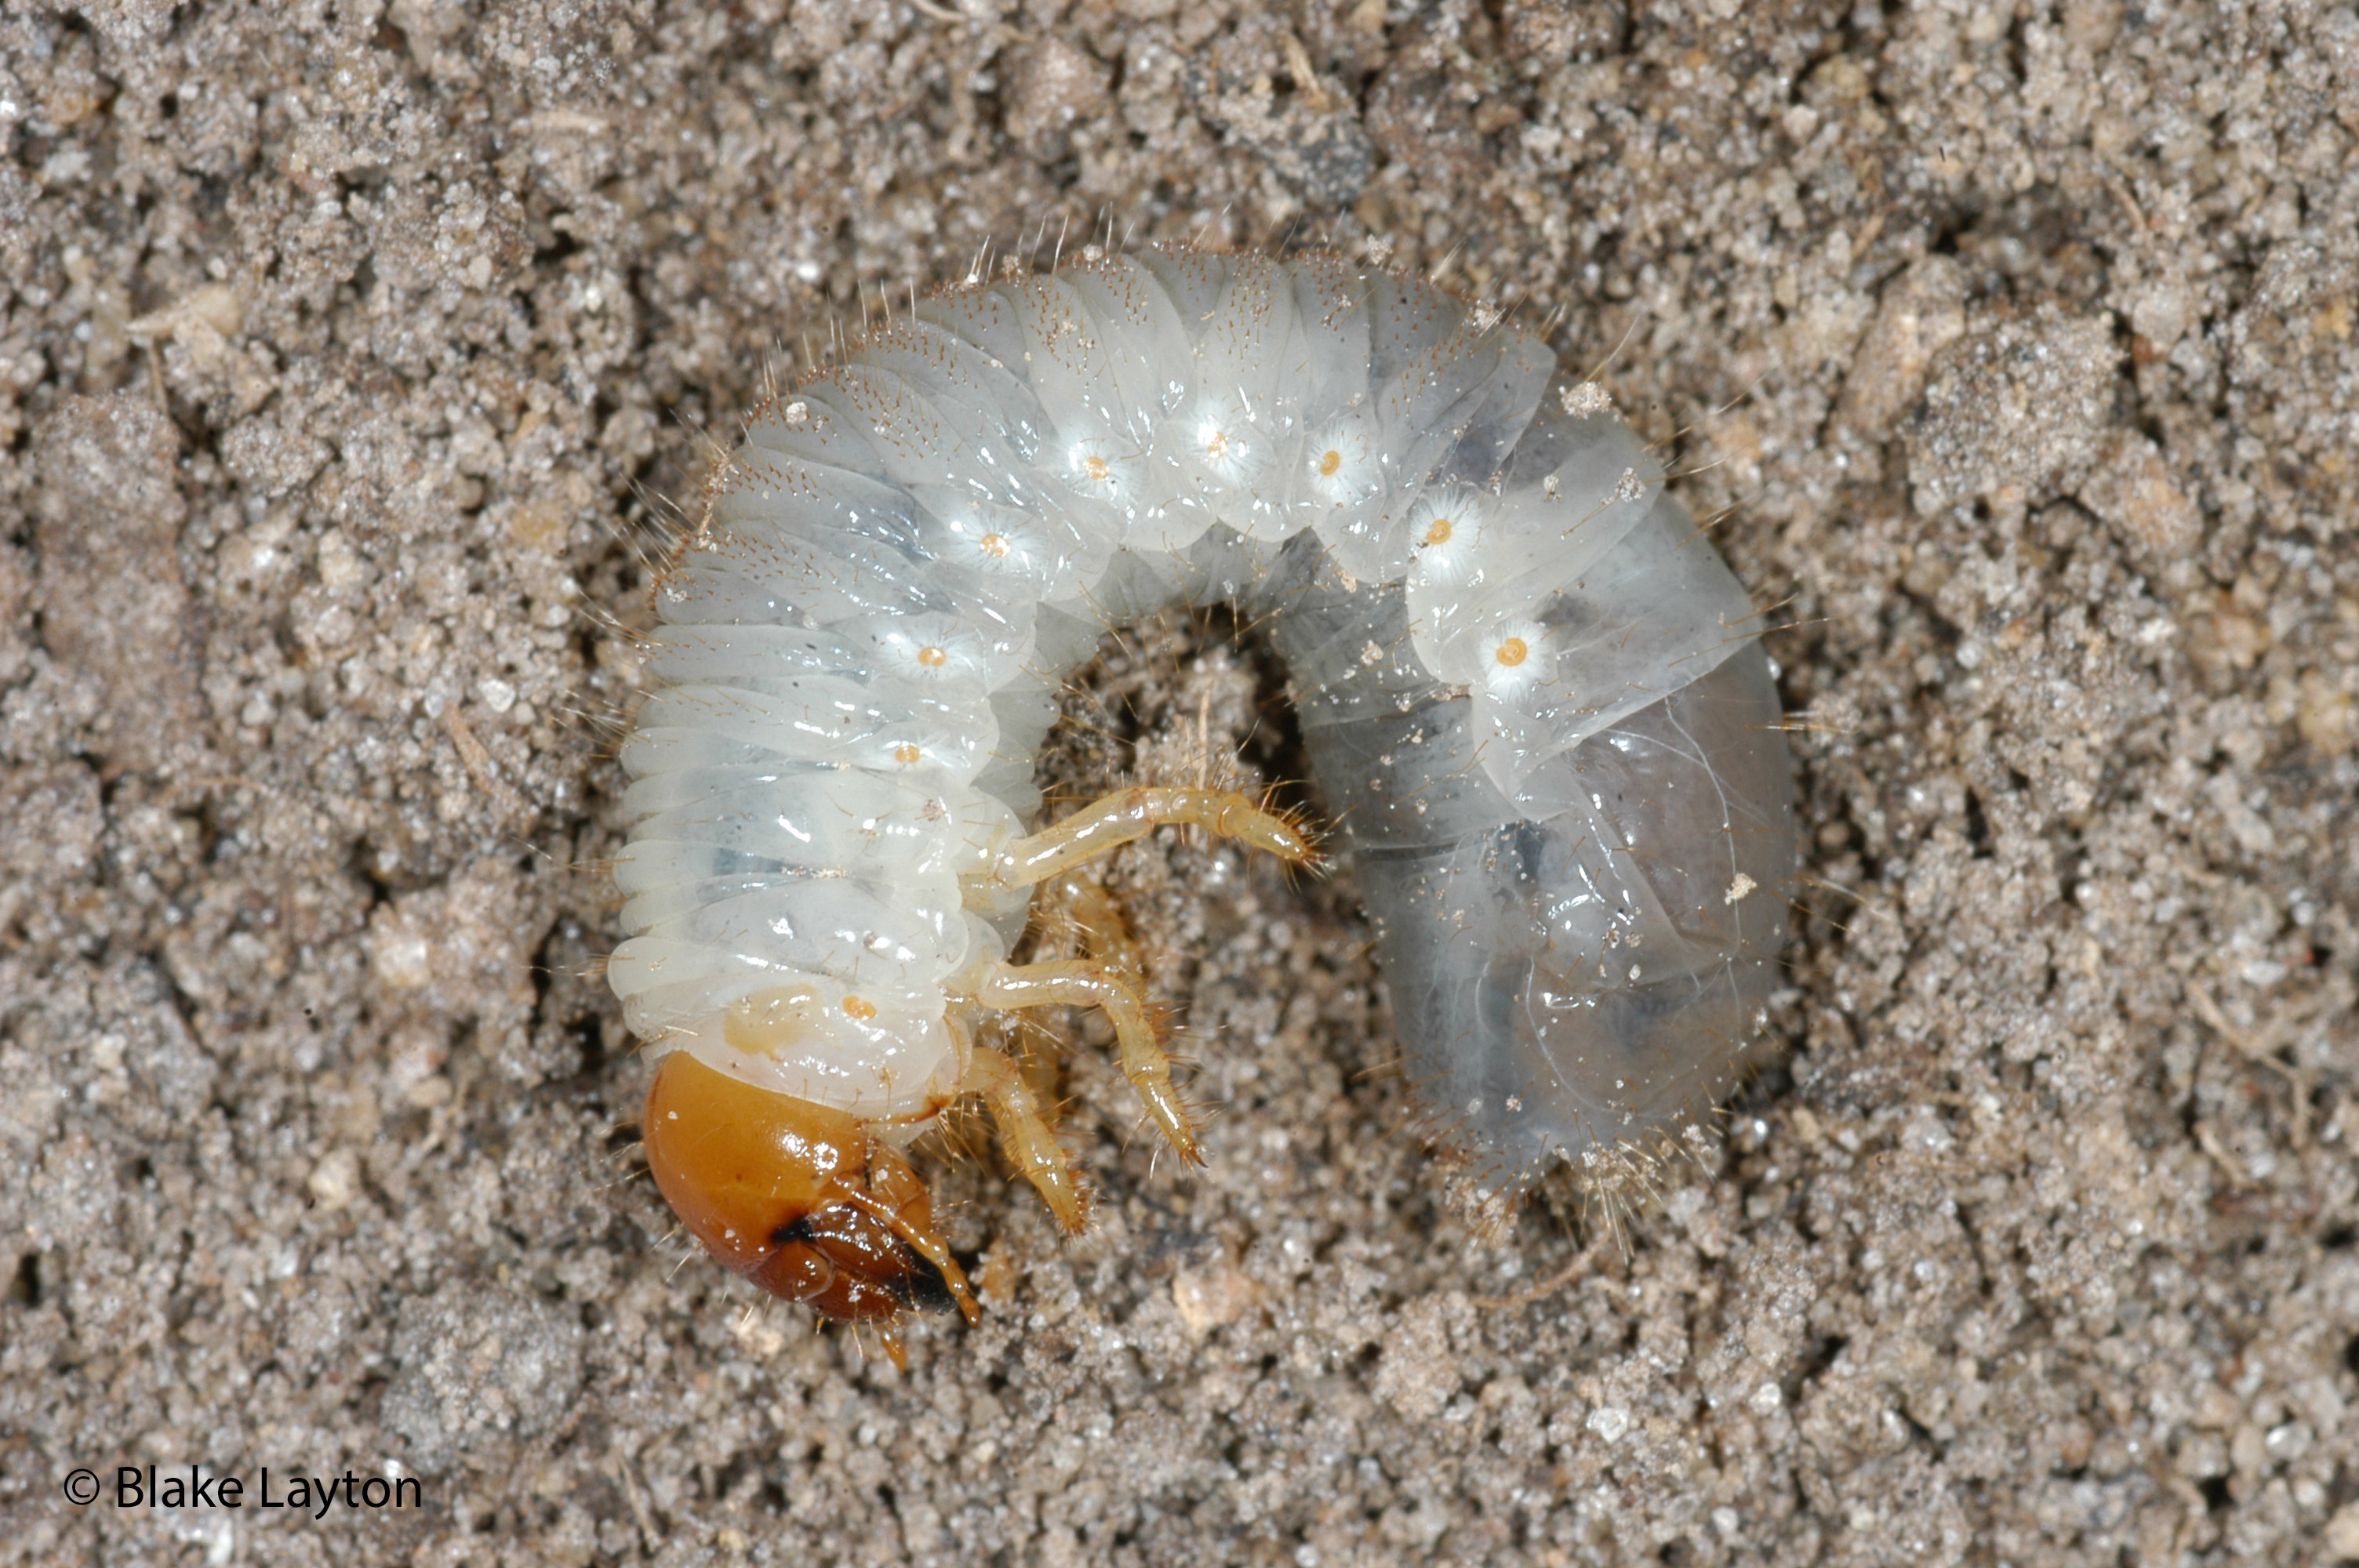 White Grubs Vol. 5, No. 9  Mississippi State University Extension Service